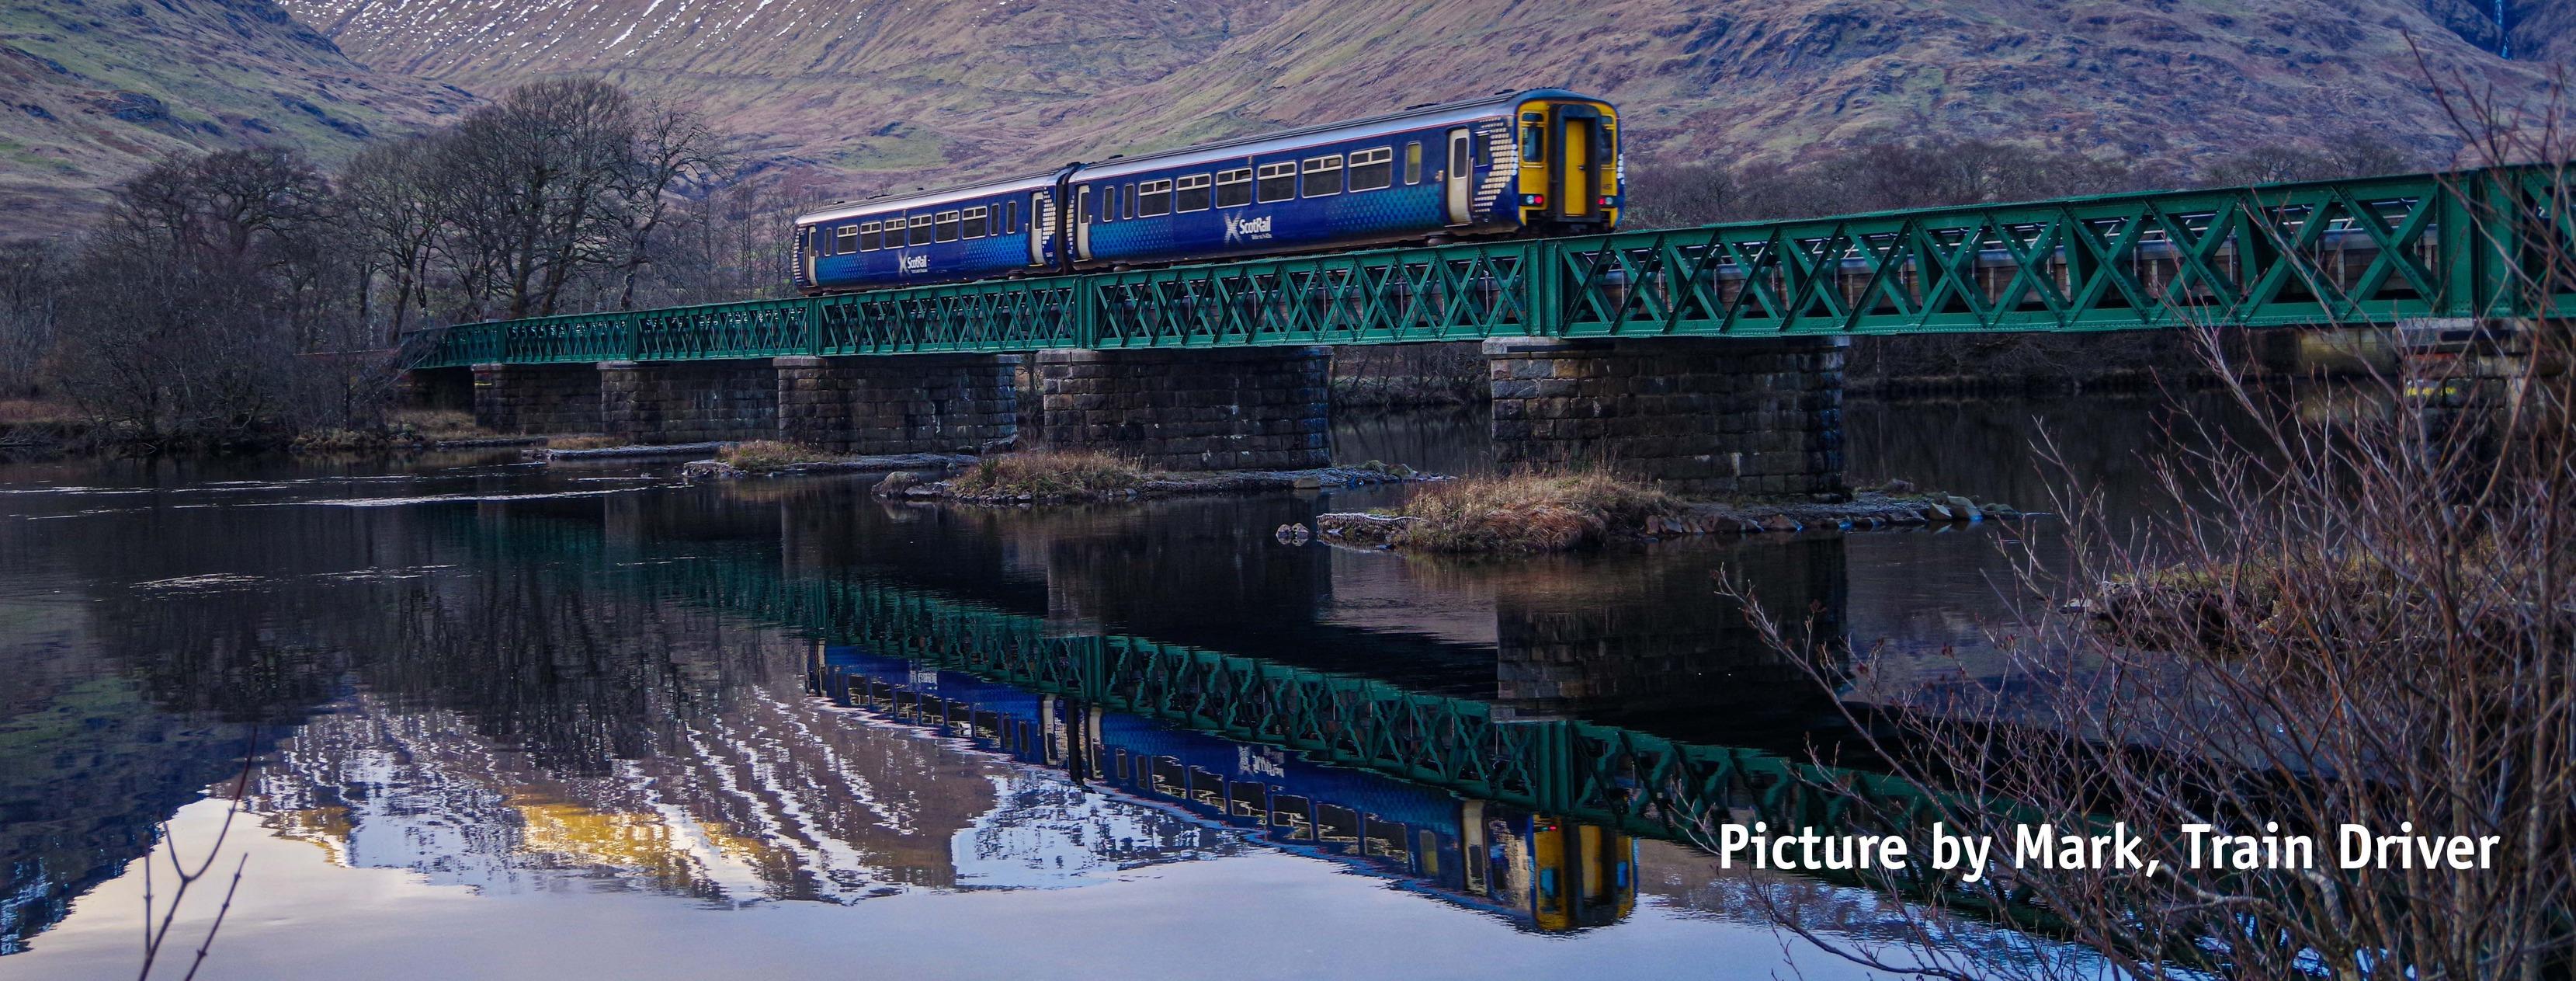 20% Off Hostels, Hotels & Tickets with Scotrail